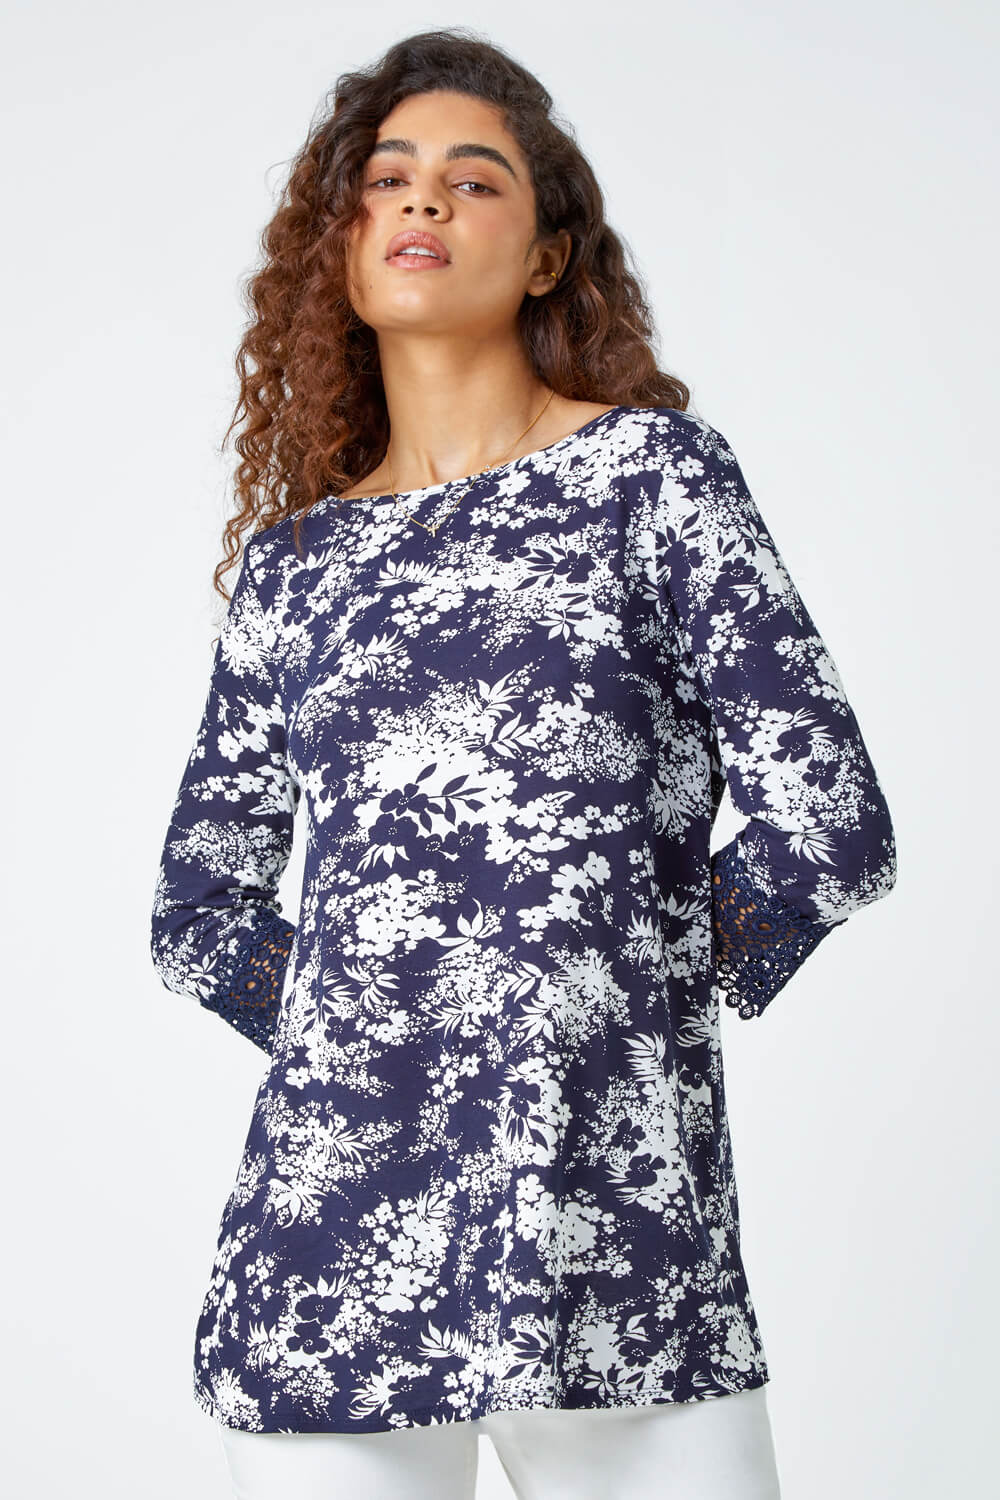 Navy  Floral Lace Trim Stretch Top, Image 4 of 5